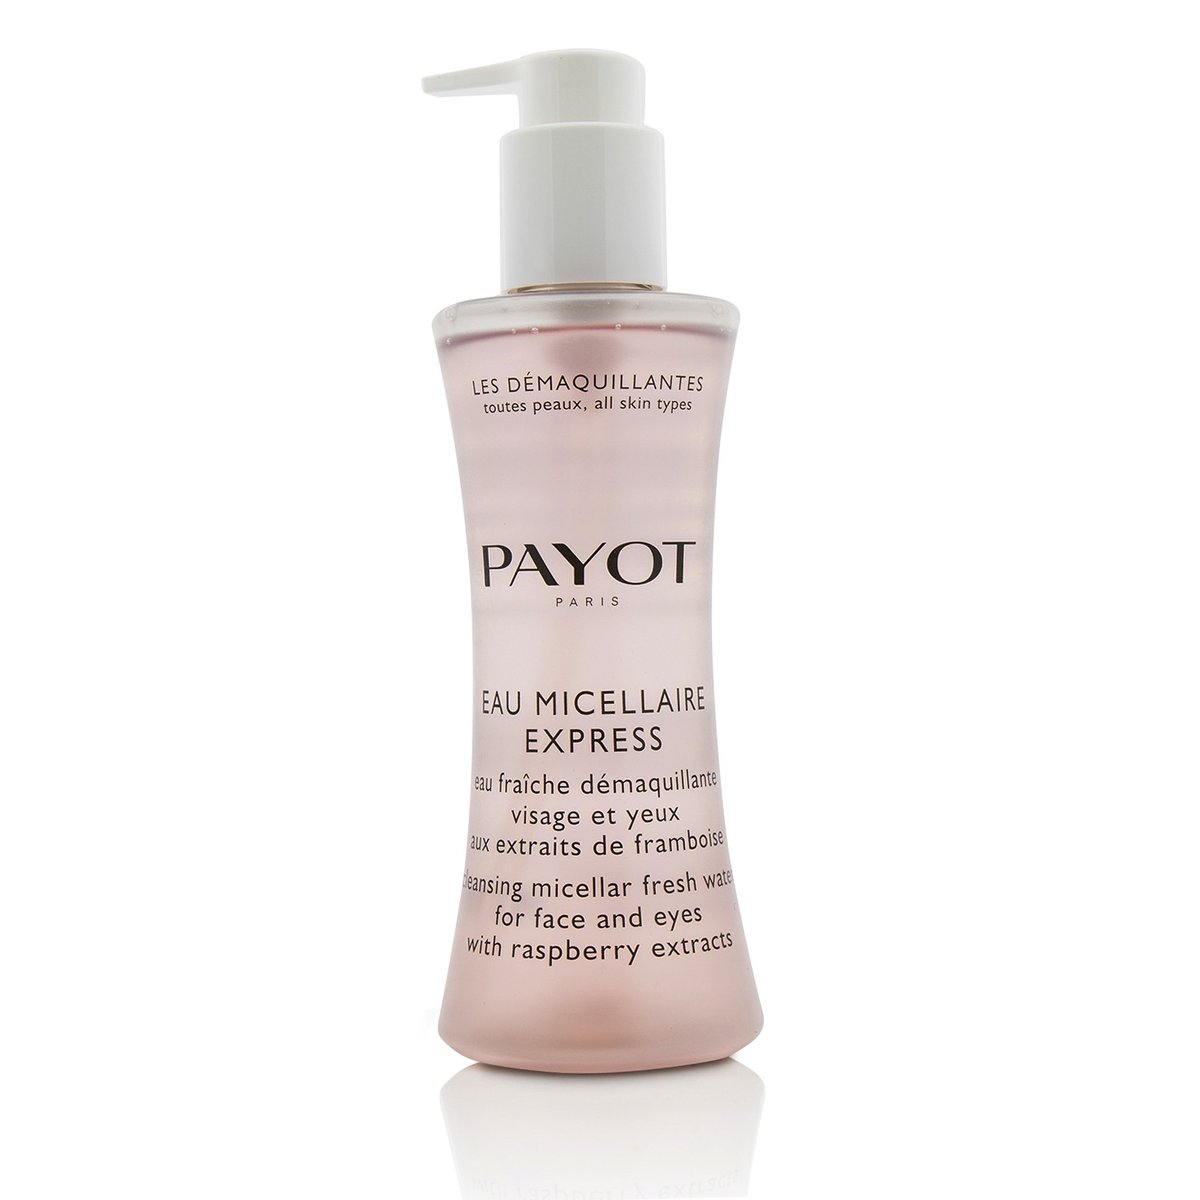 Payot | Les Demaquillantes Eau Micellaire Express - Cleansing Micellar  Fresh Water For Face & Eyes -[Parallel Import Product] | HKTVmall The  Largest HK Shopping Platform